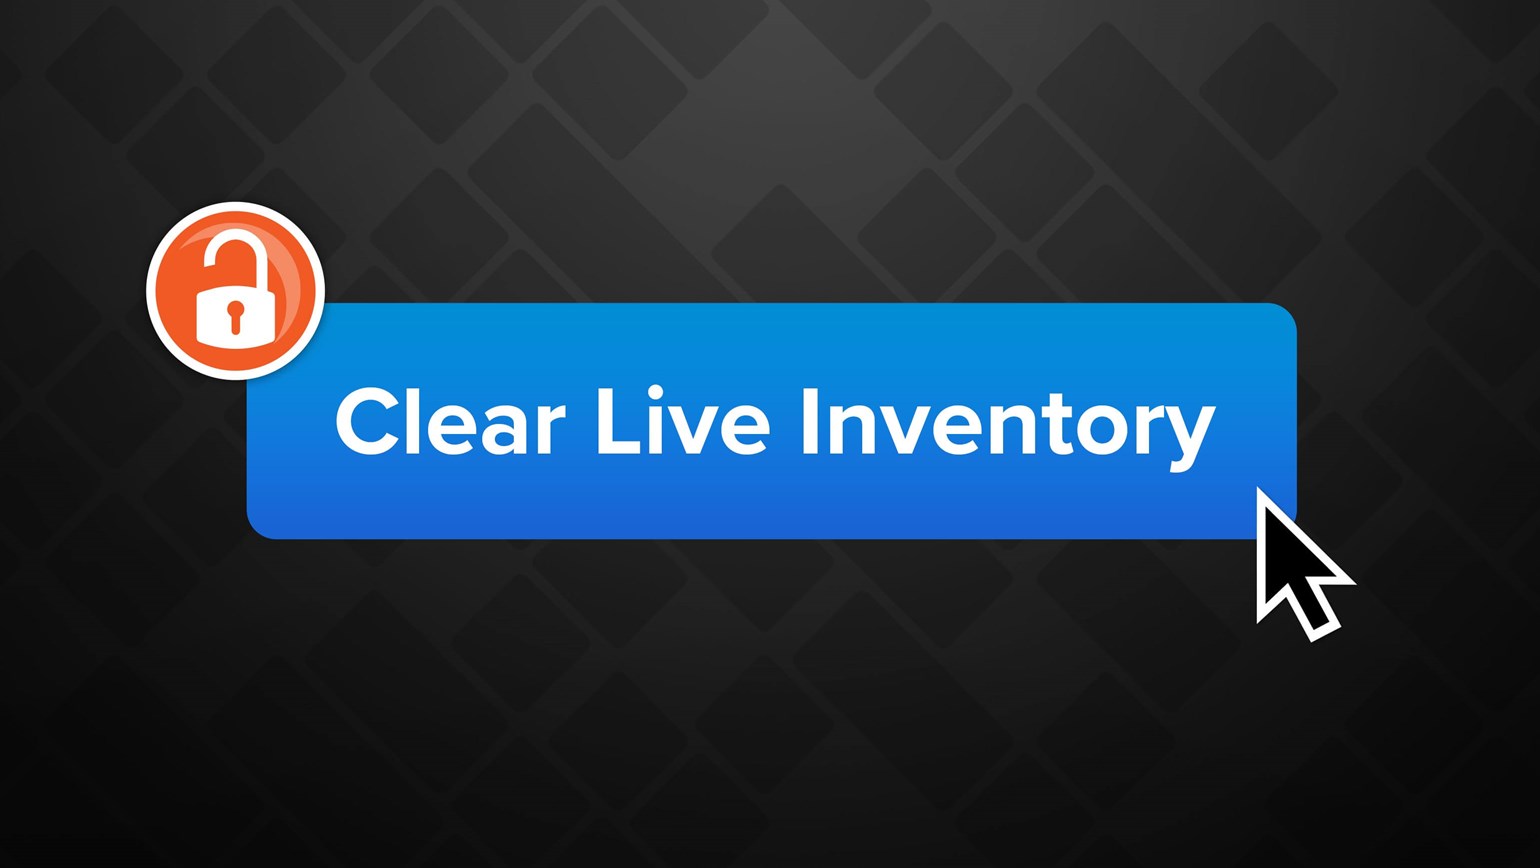 Clearing Your Live Inventory Just Got Easier